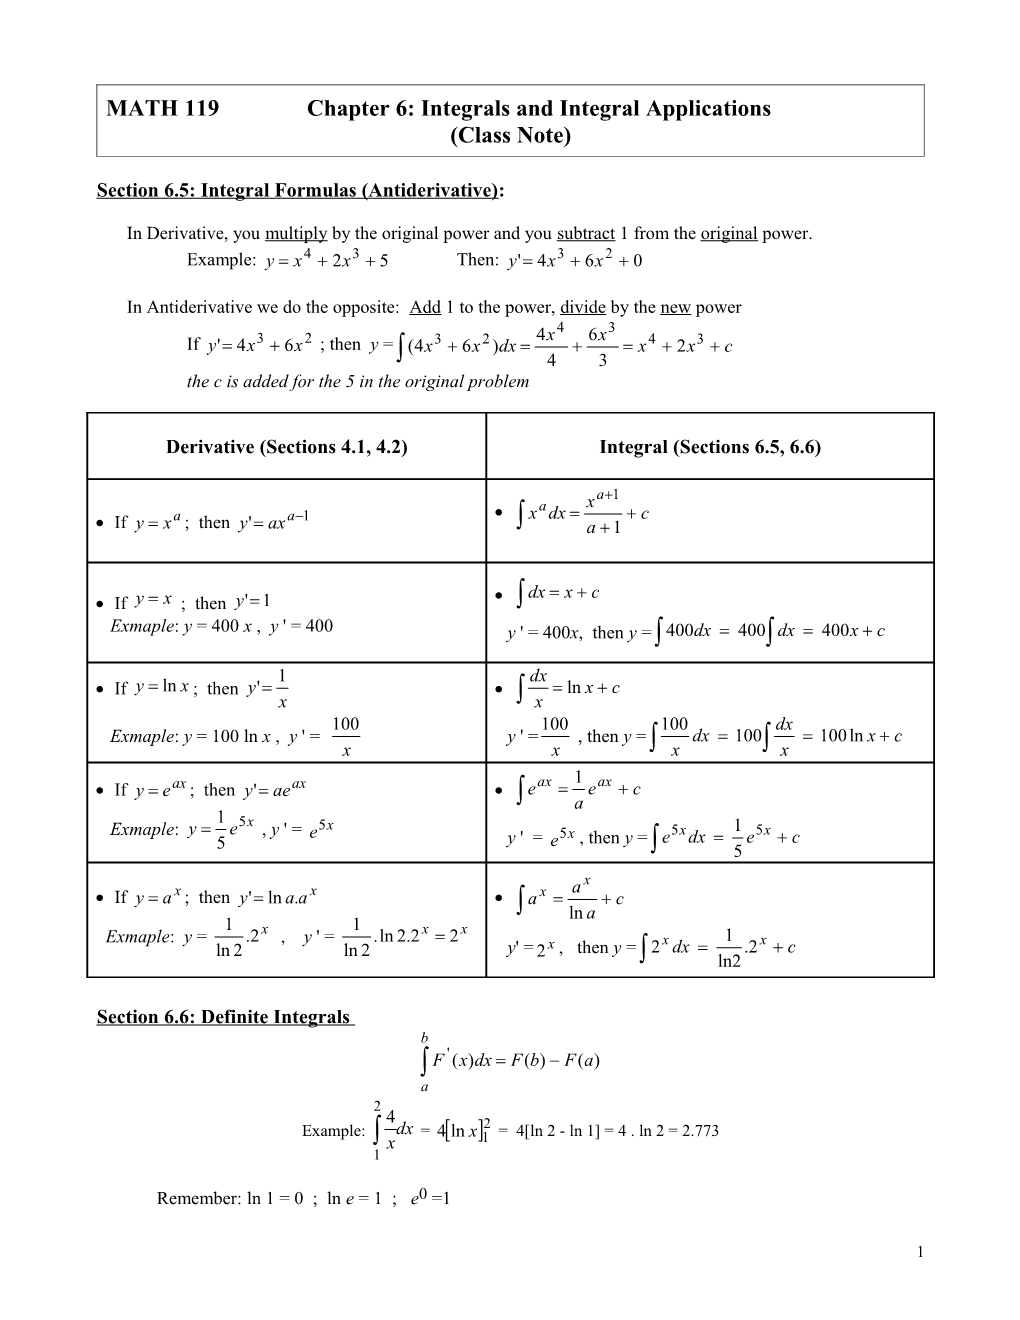 MATH 119 Chapter 6: Integrals and Integral Applications